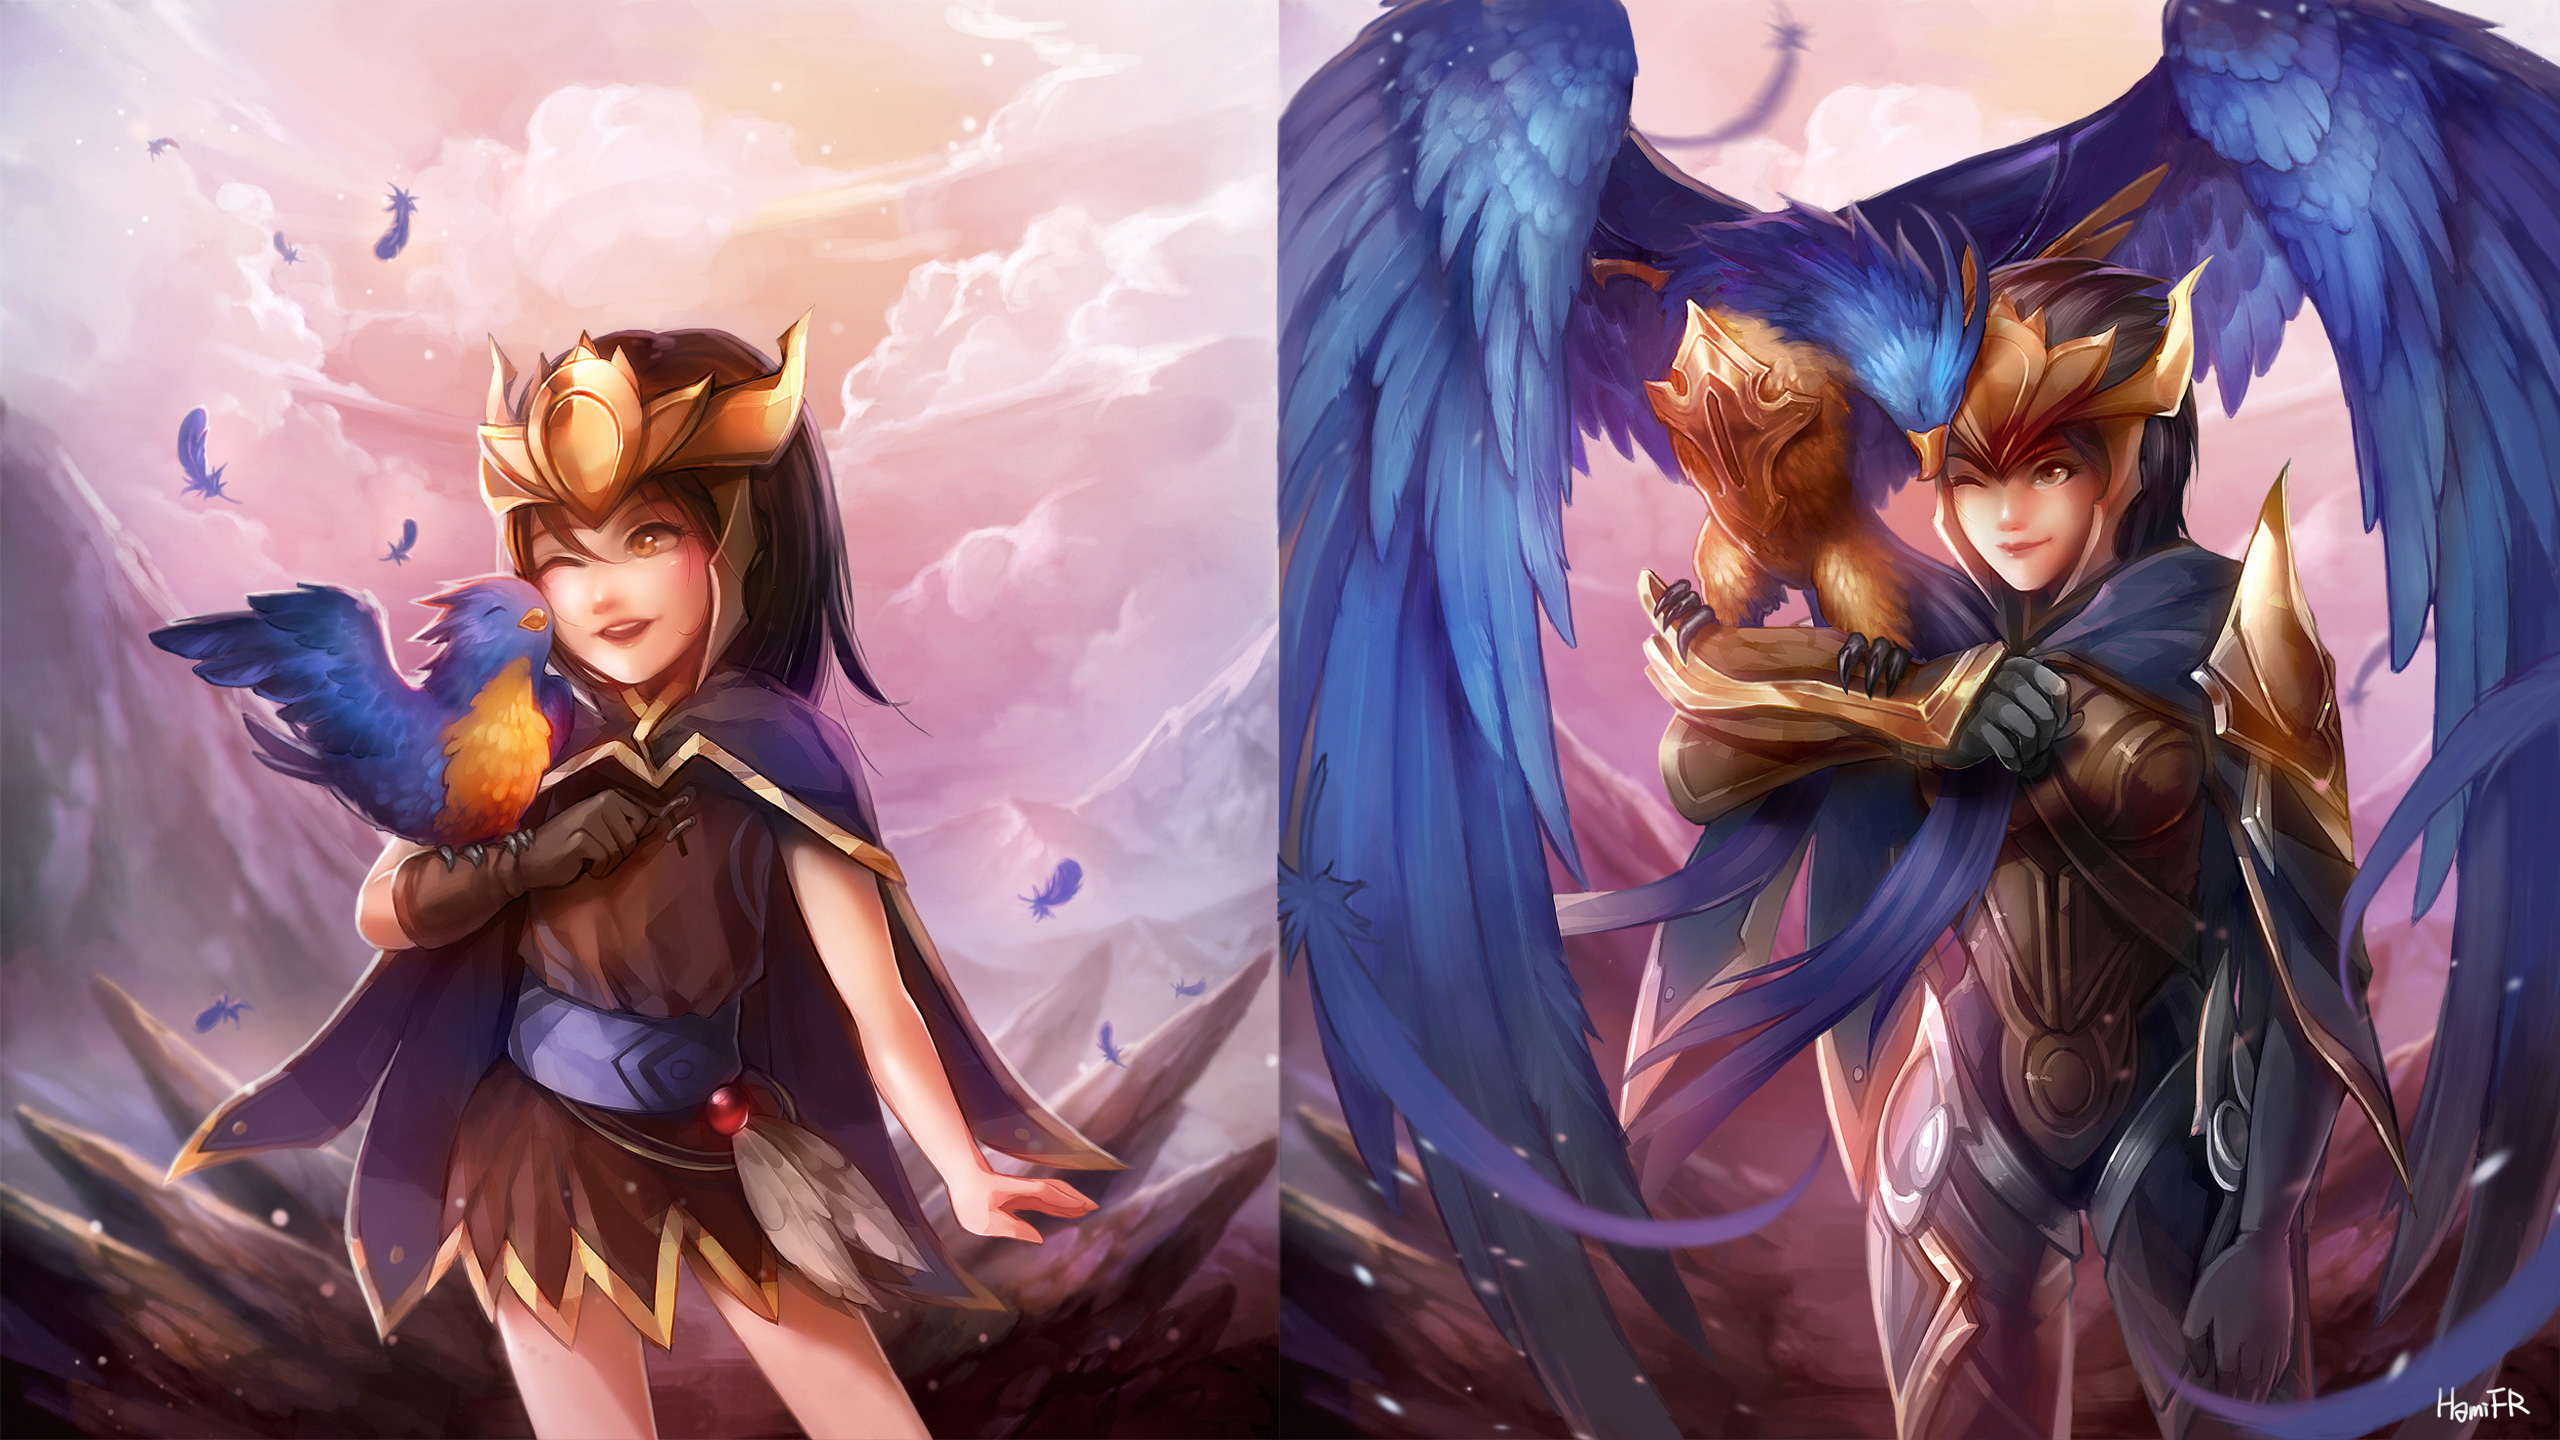 Video Game League Of Legends HD Wallpaper | Background Image